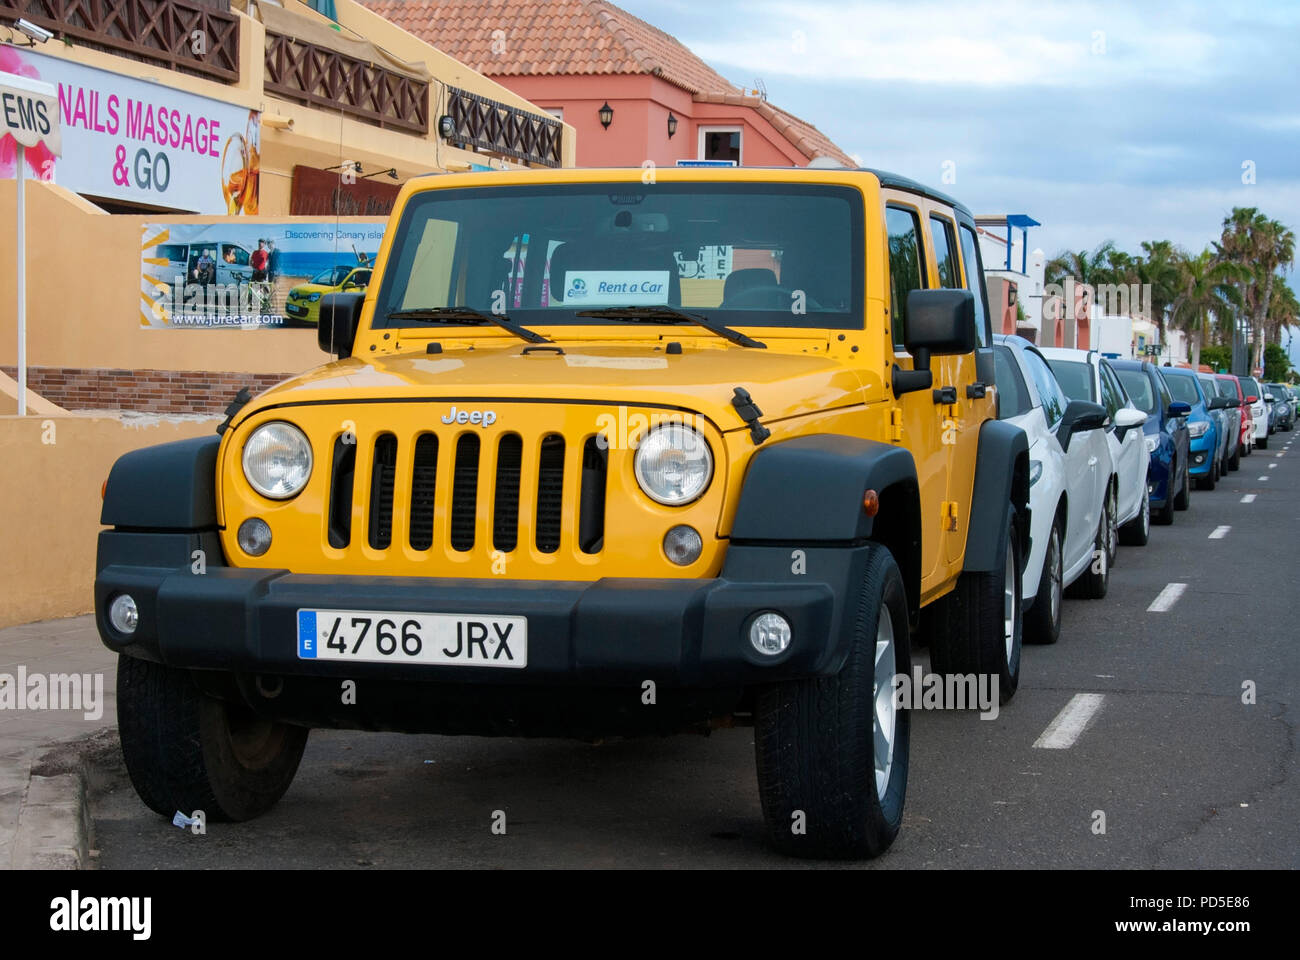 2017 Yellow & Black Jeep Wrangler Sport Unlimited Car front nearside driver  side view of yellow and black 2017 model four door 4 x 4 SUV jeep wrangler  Stock Photo - Alamy